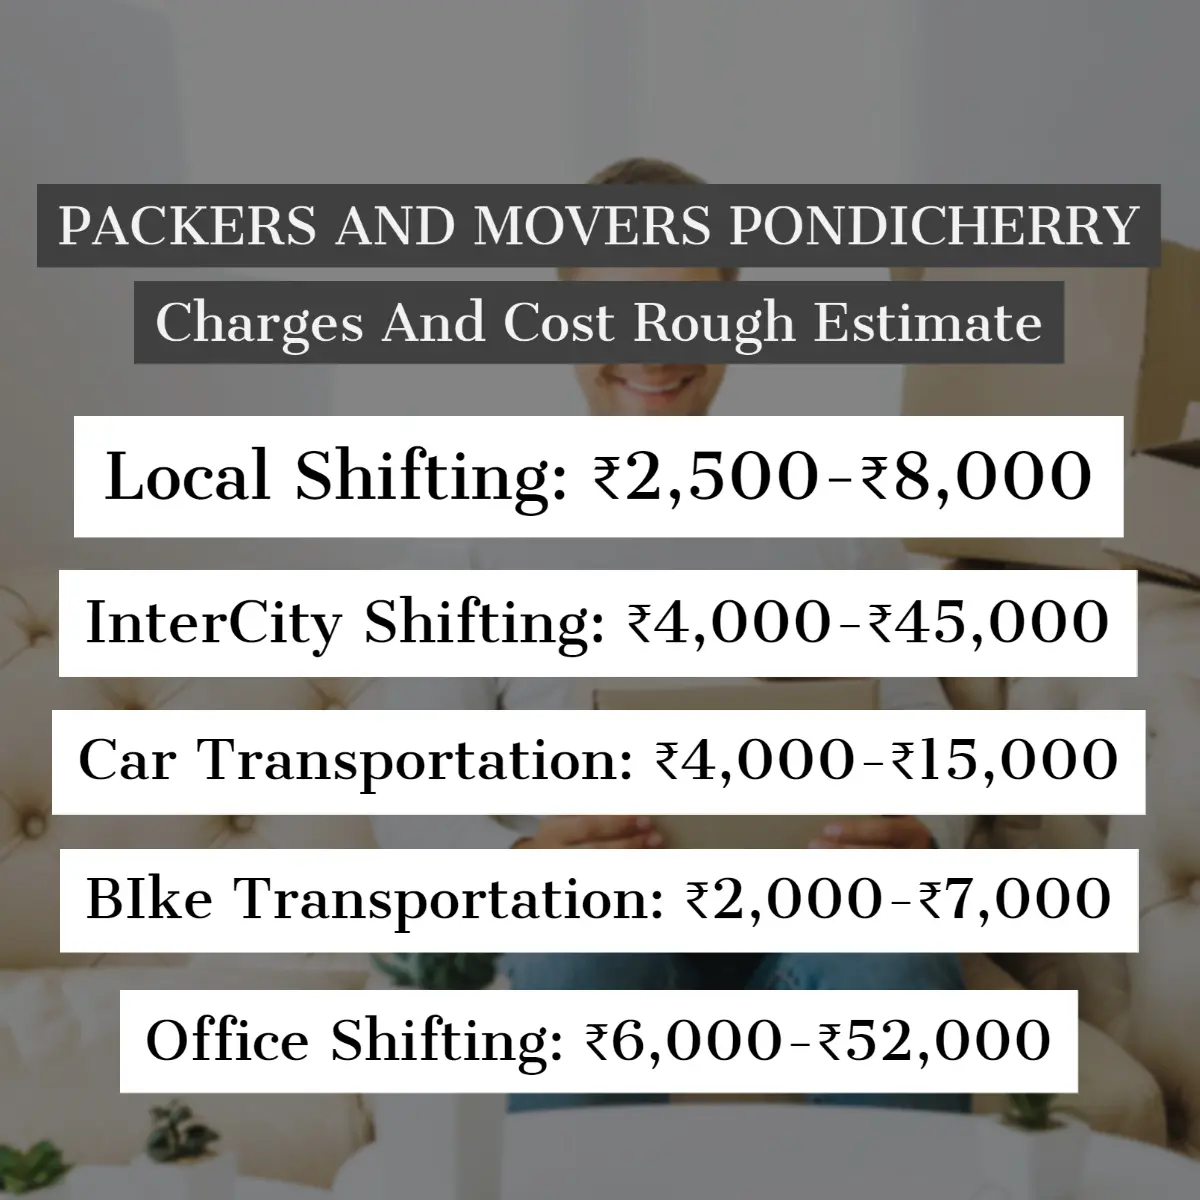 Packers and Movers Pondicherry Charges